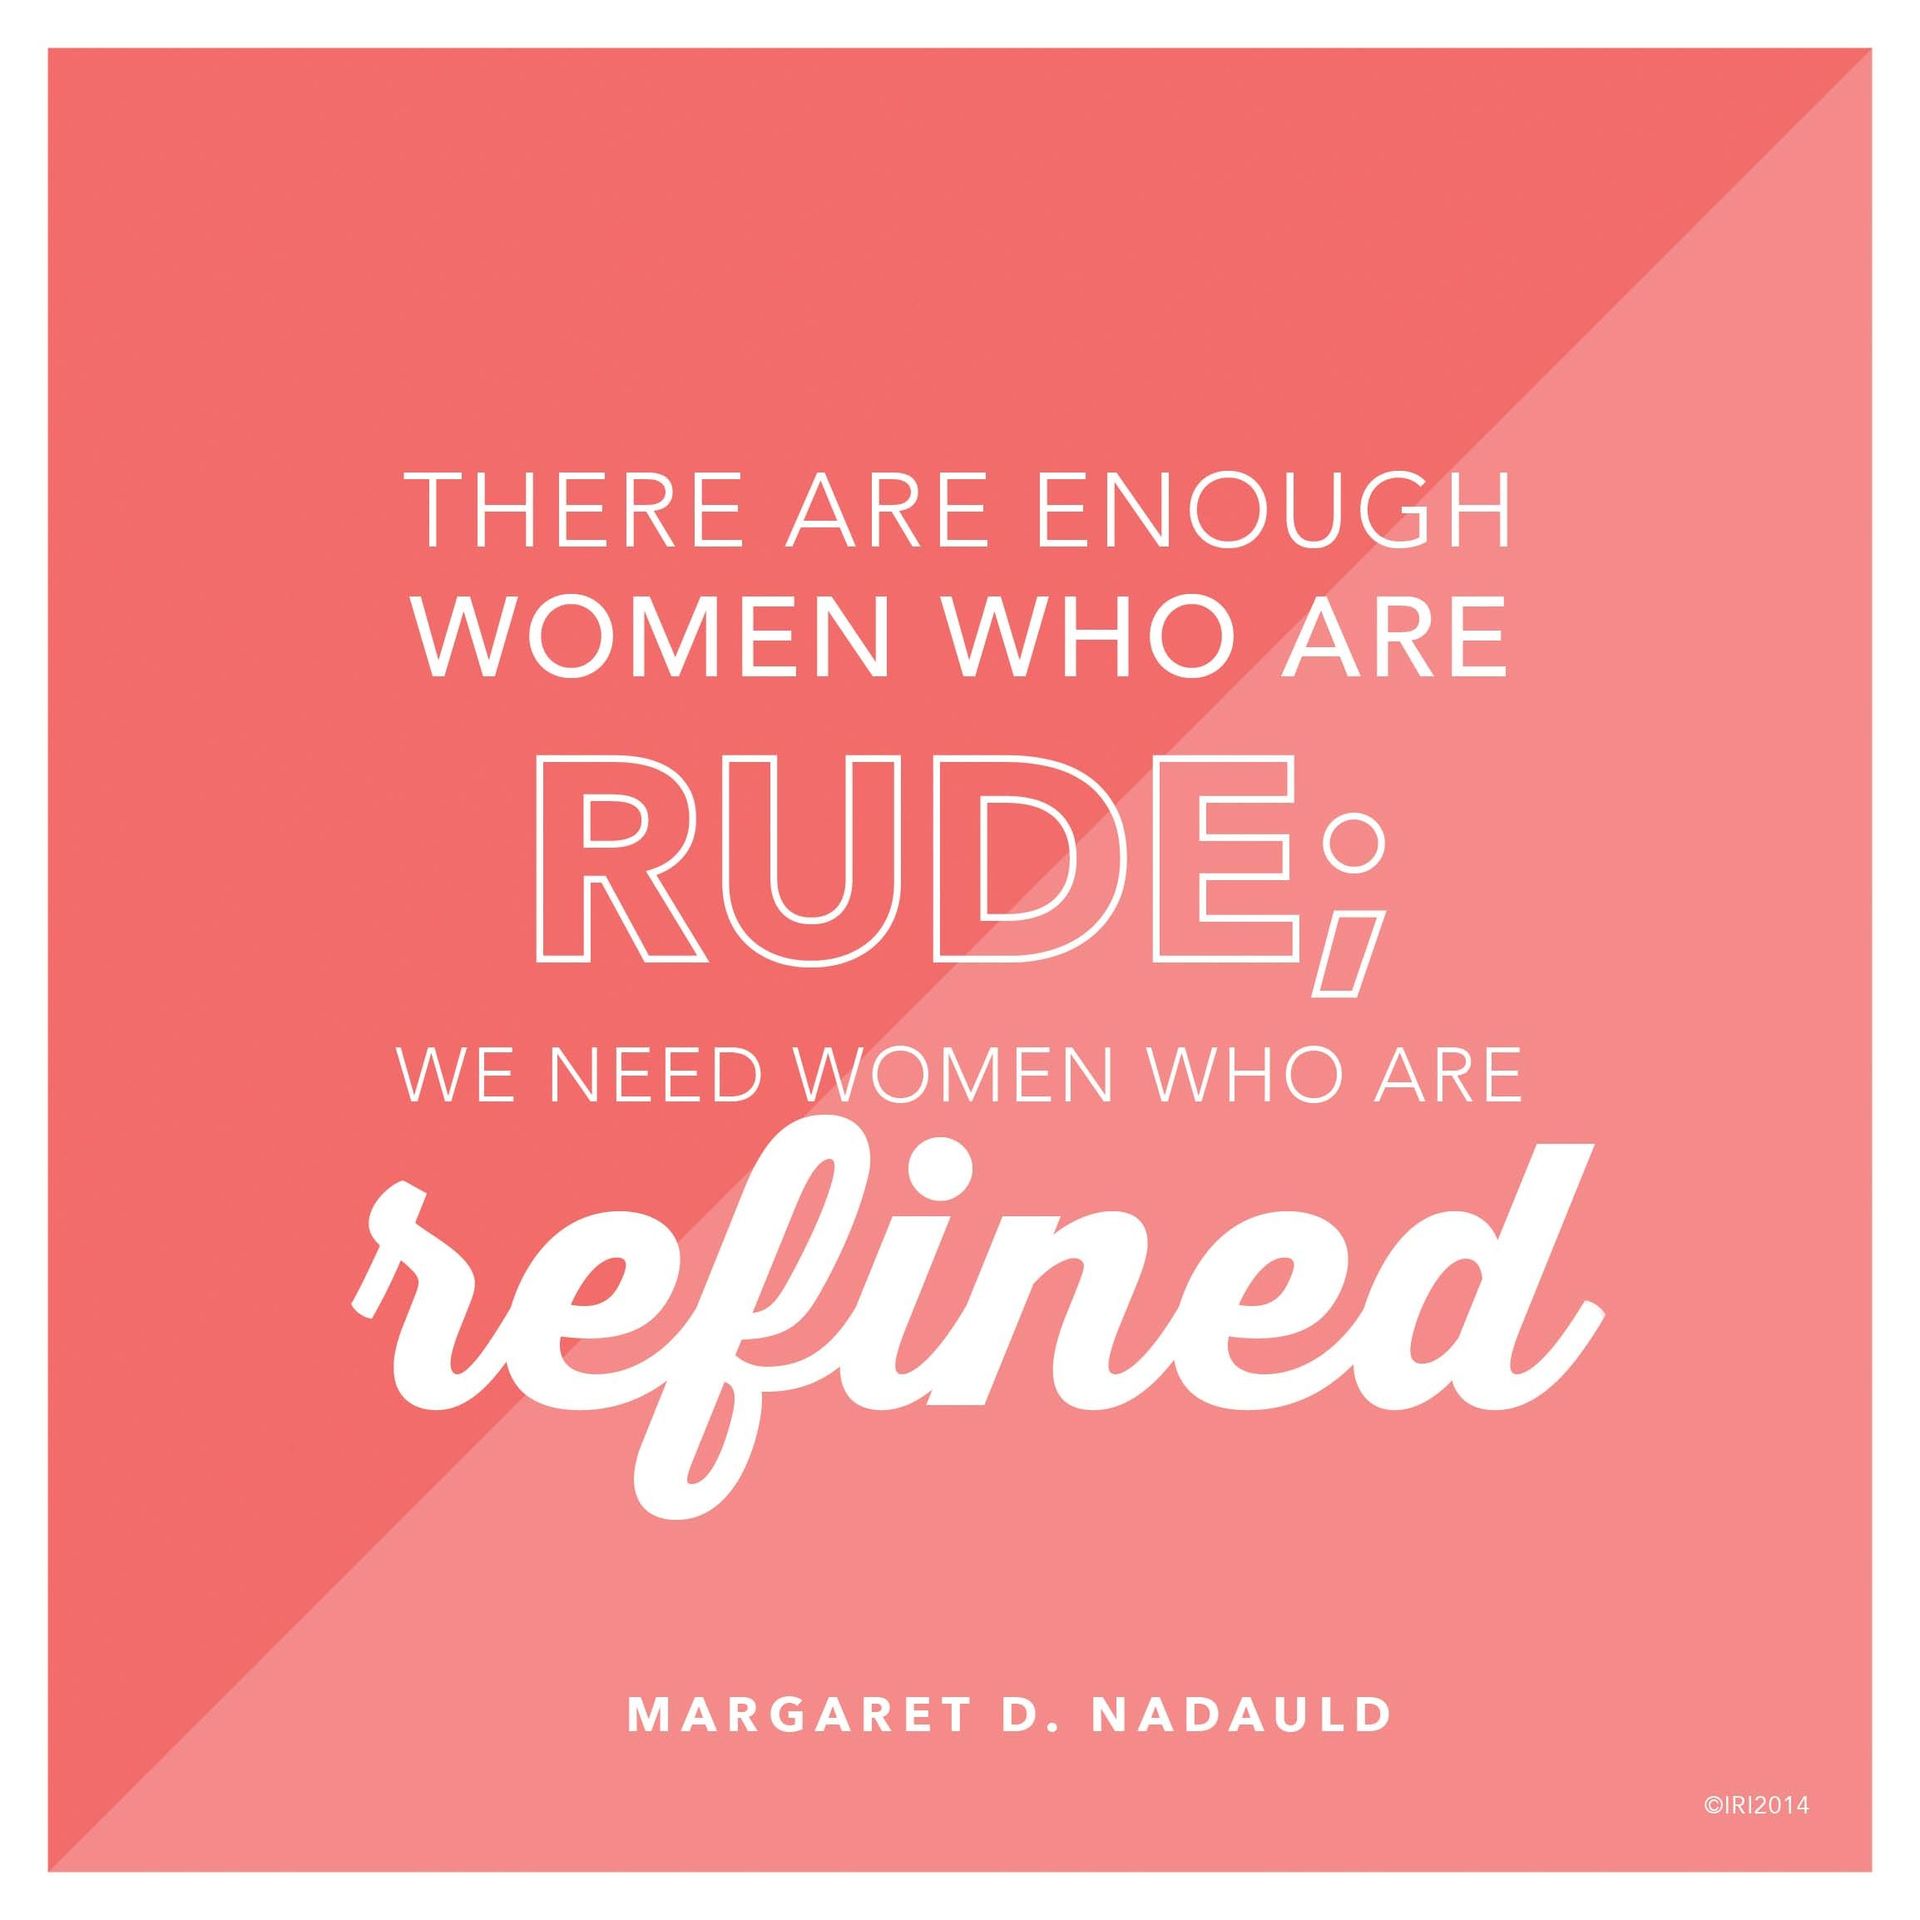 “There are enough women who are rude; we need women who are refined.”—Sister Margaret D. Nadauld, “The Joy of Womanhood”